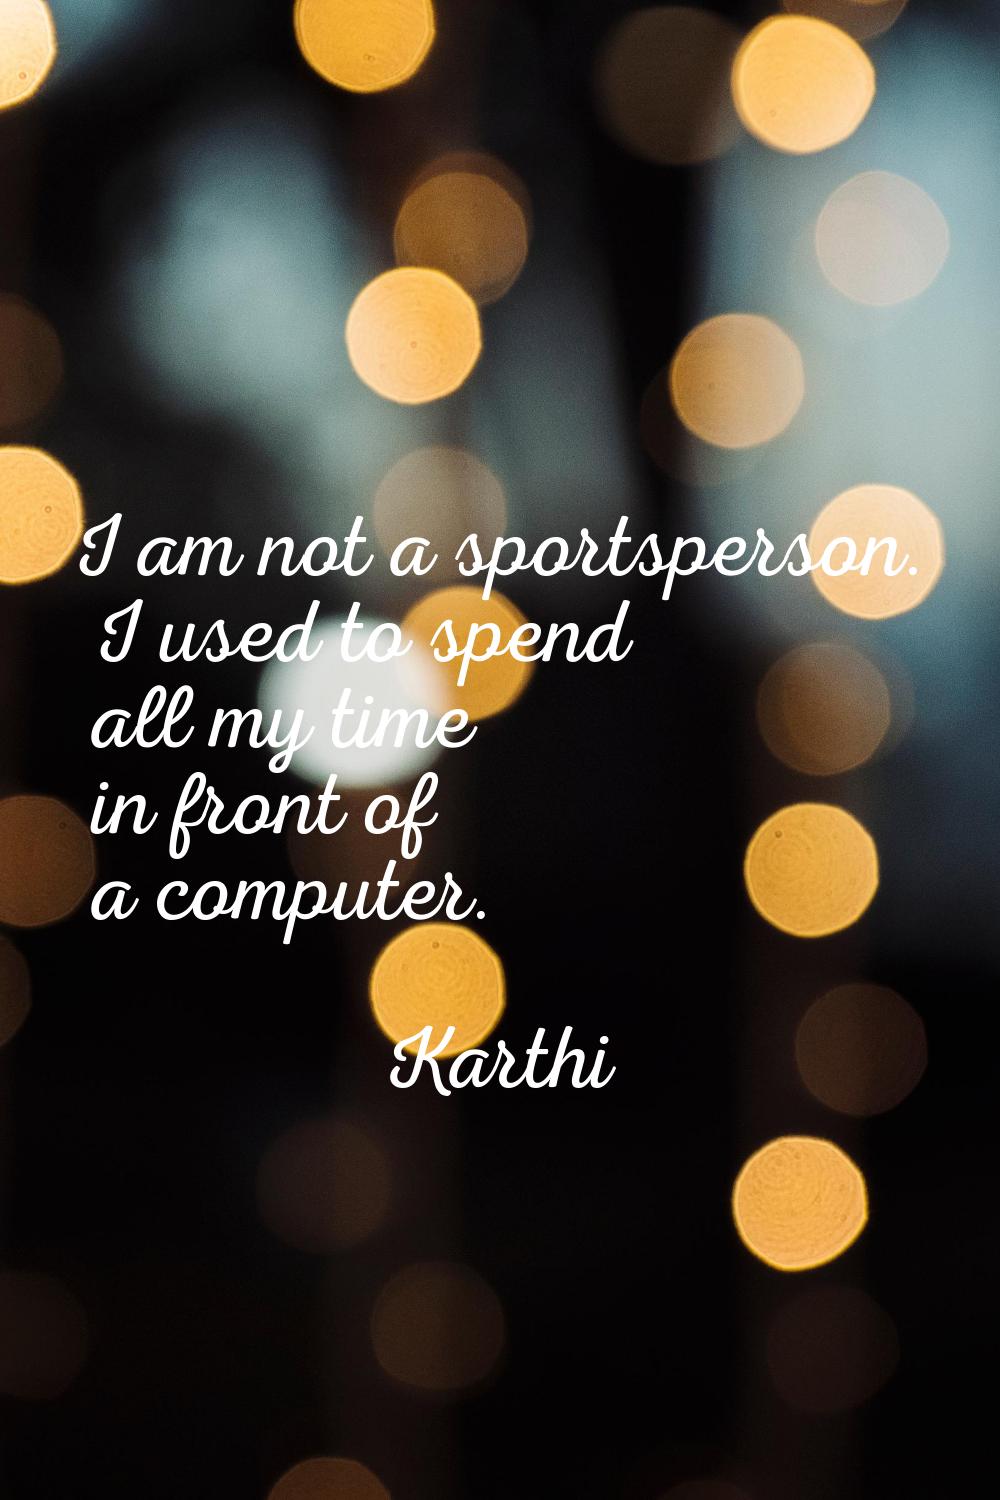 I am not a sportsperson. I used to spend all my time in front of a computer.